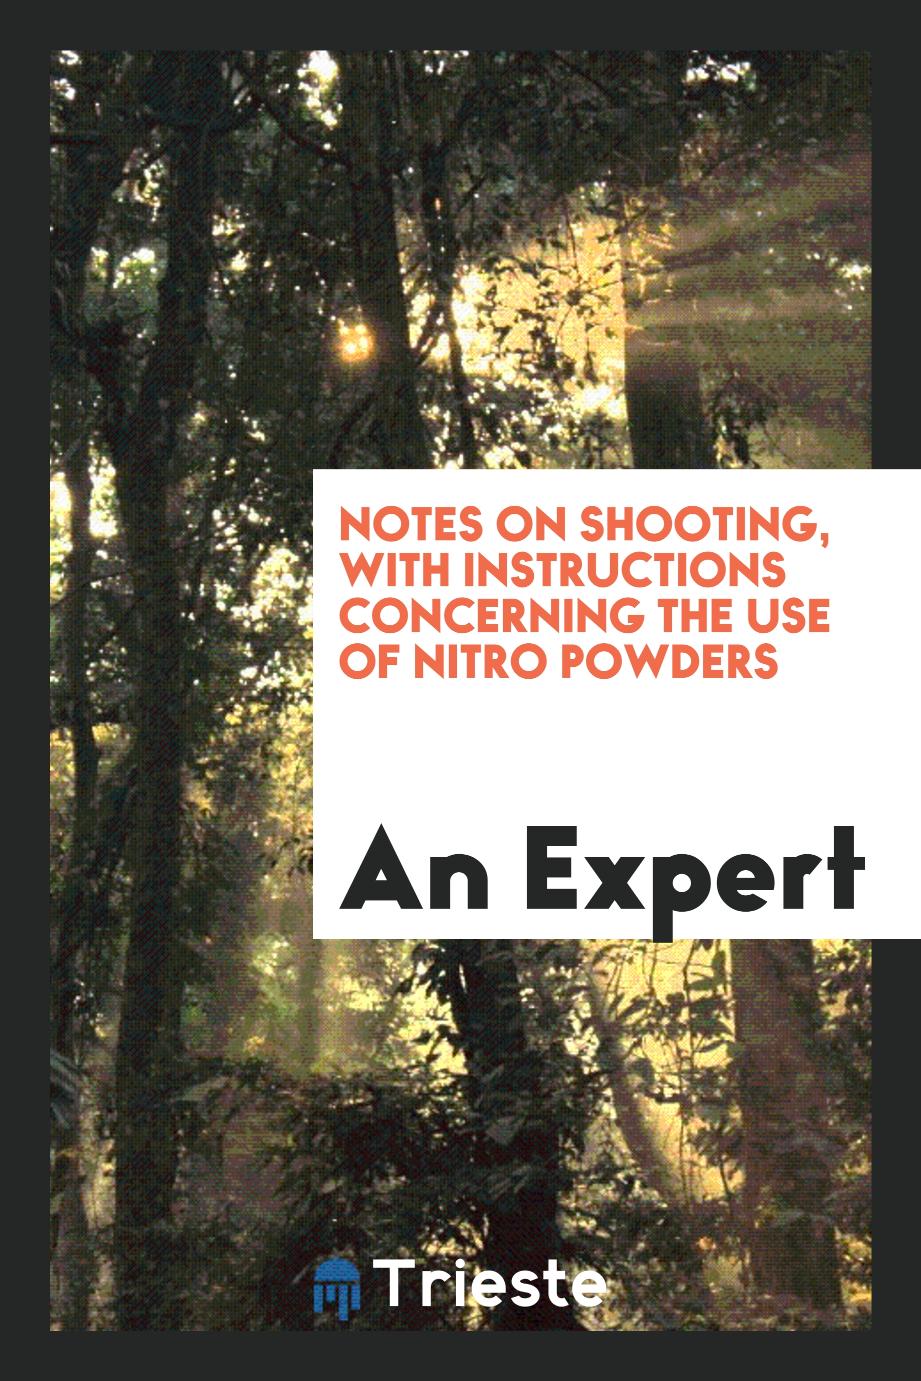 Notes on Shooting, With Instructions Concerning the Use of Nitro Powders